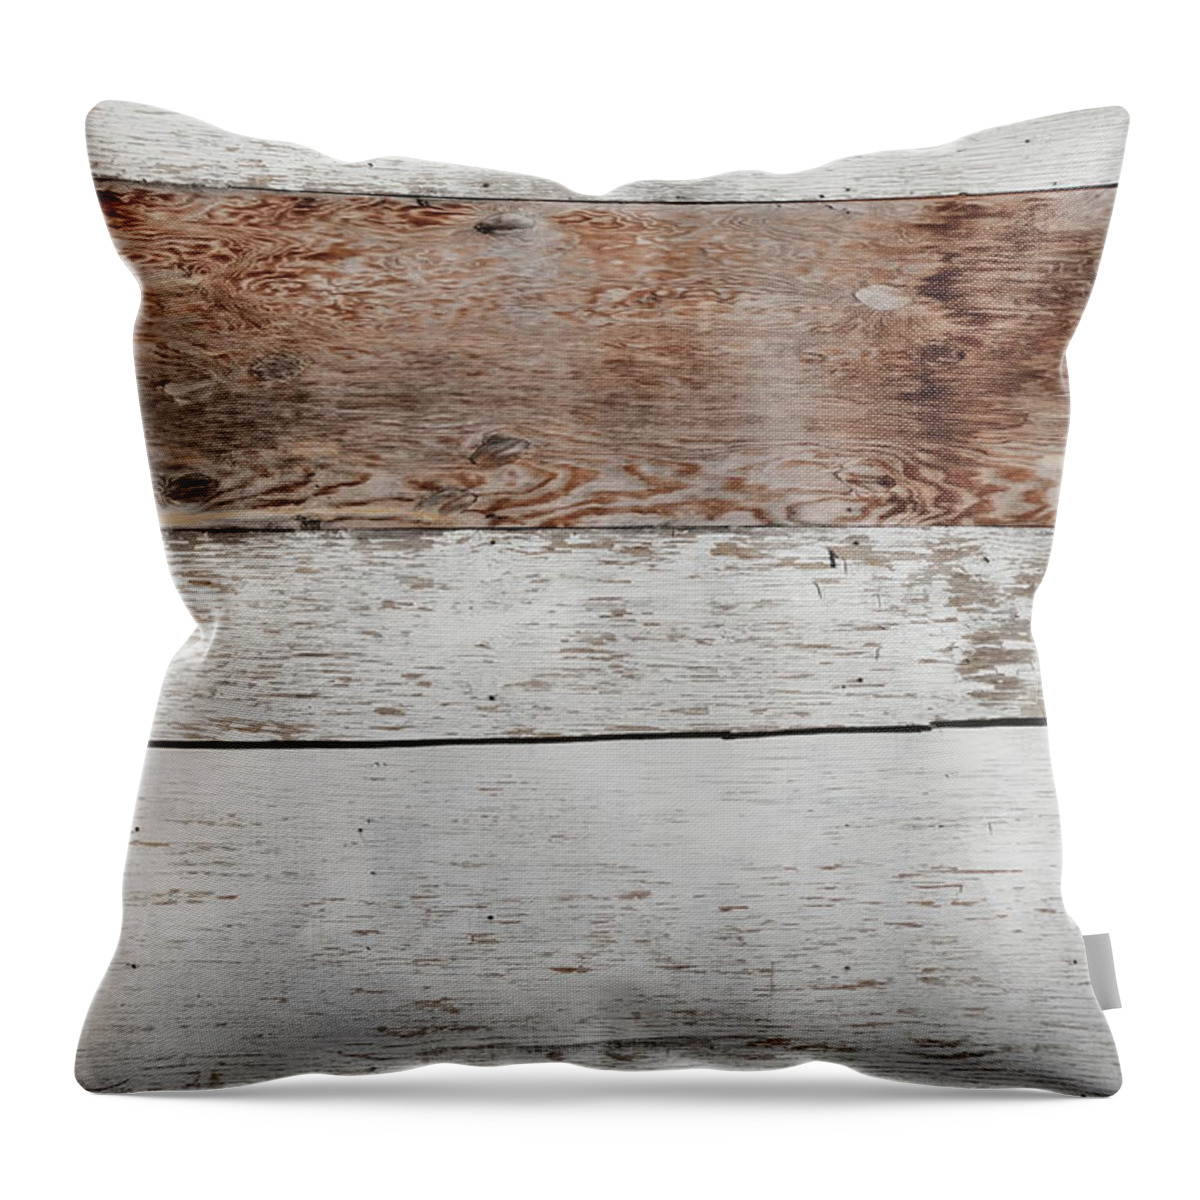 Wood Throw Pillow featuring the photograph Fade On Wood by Kreddible Trout